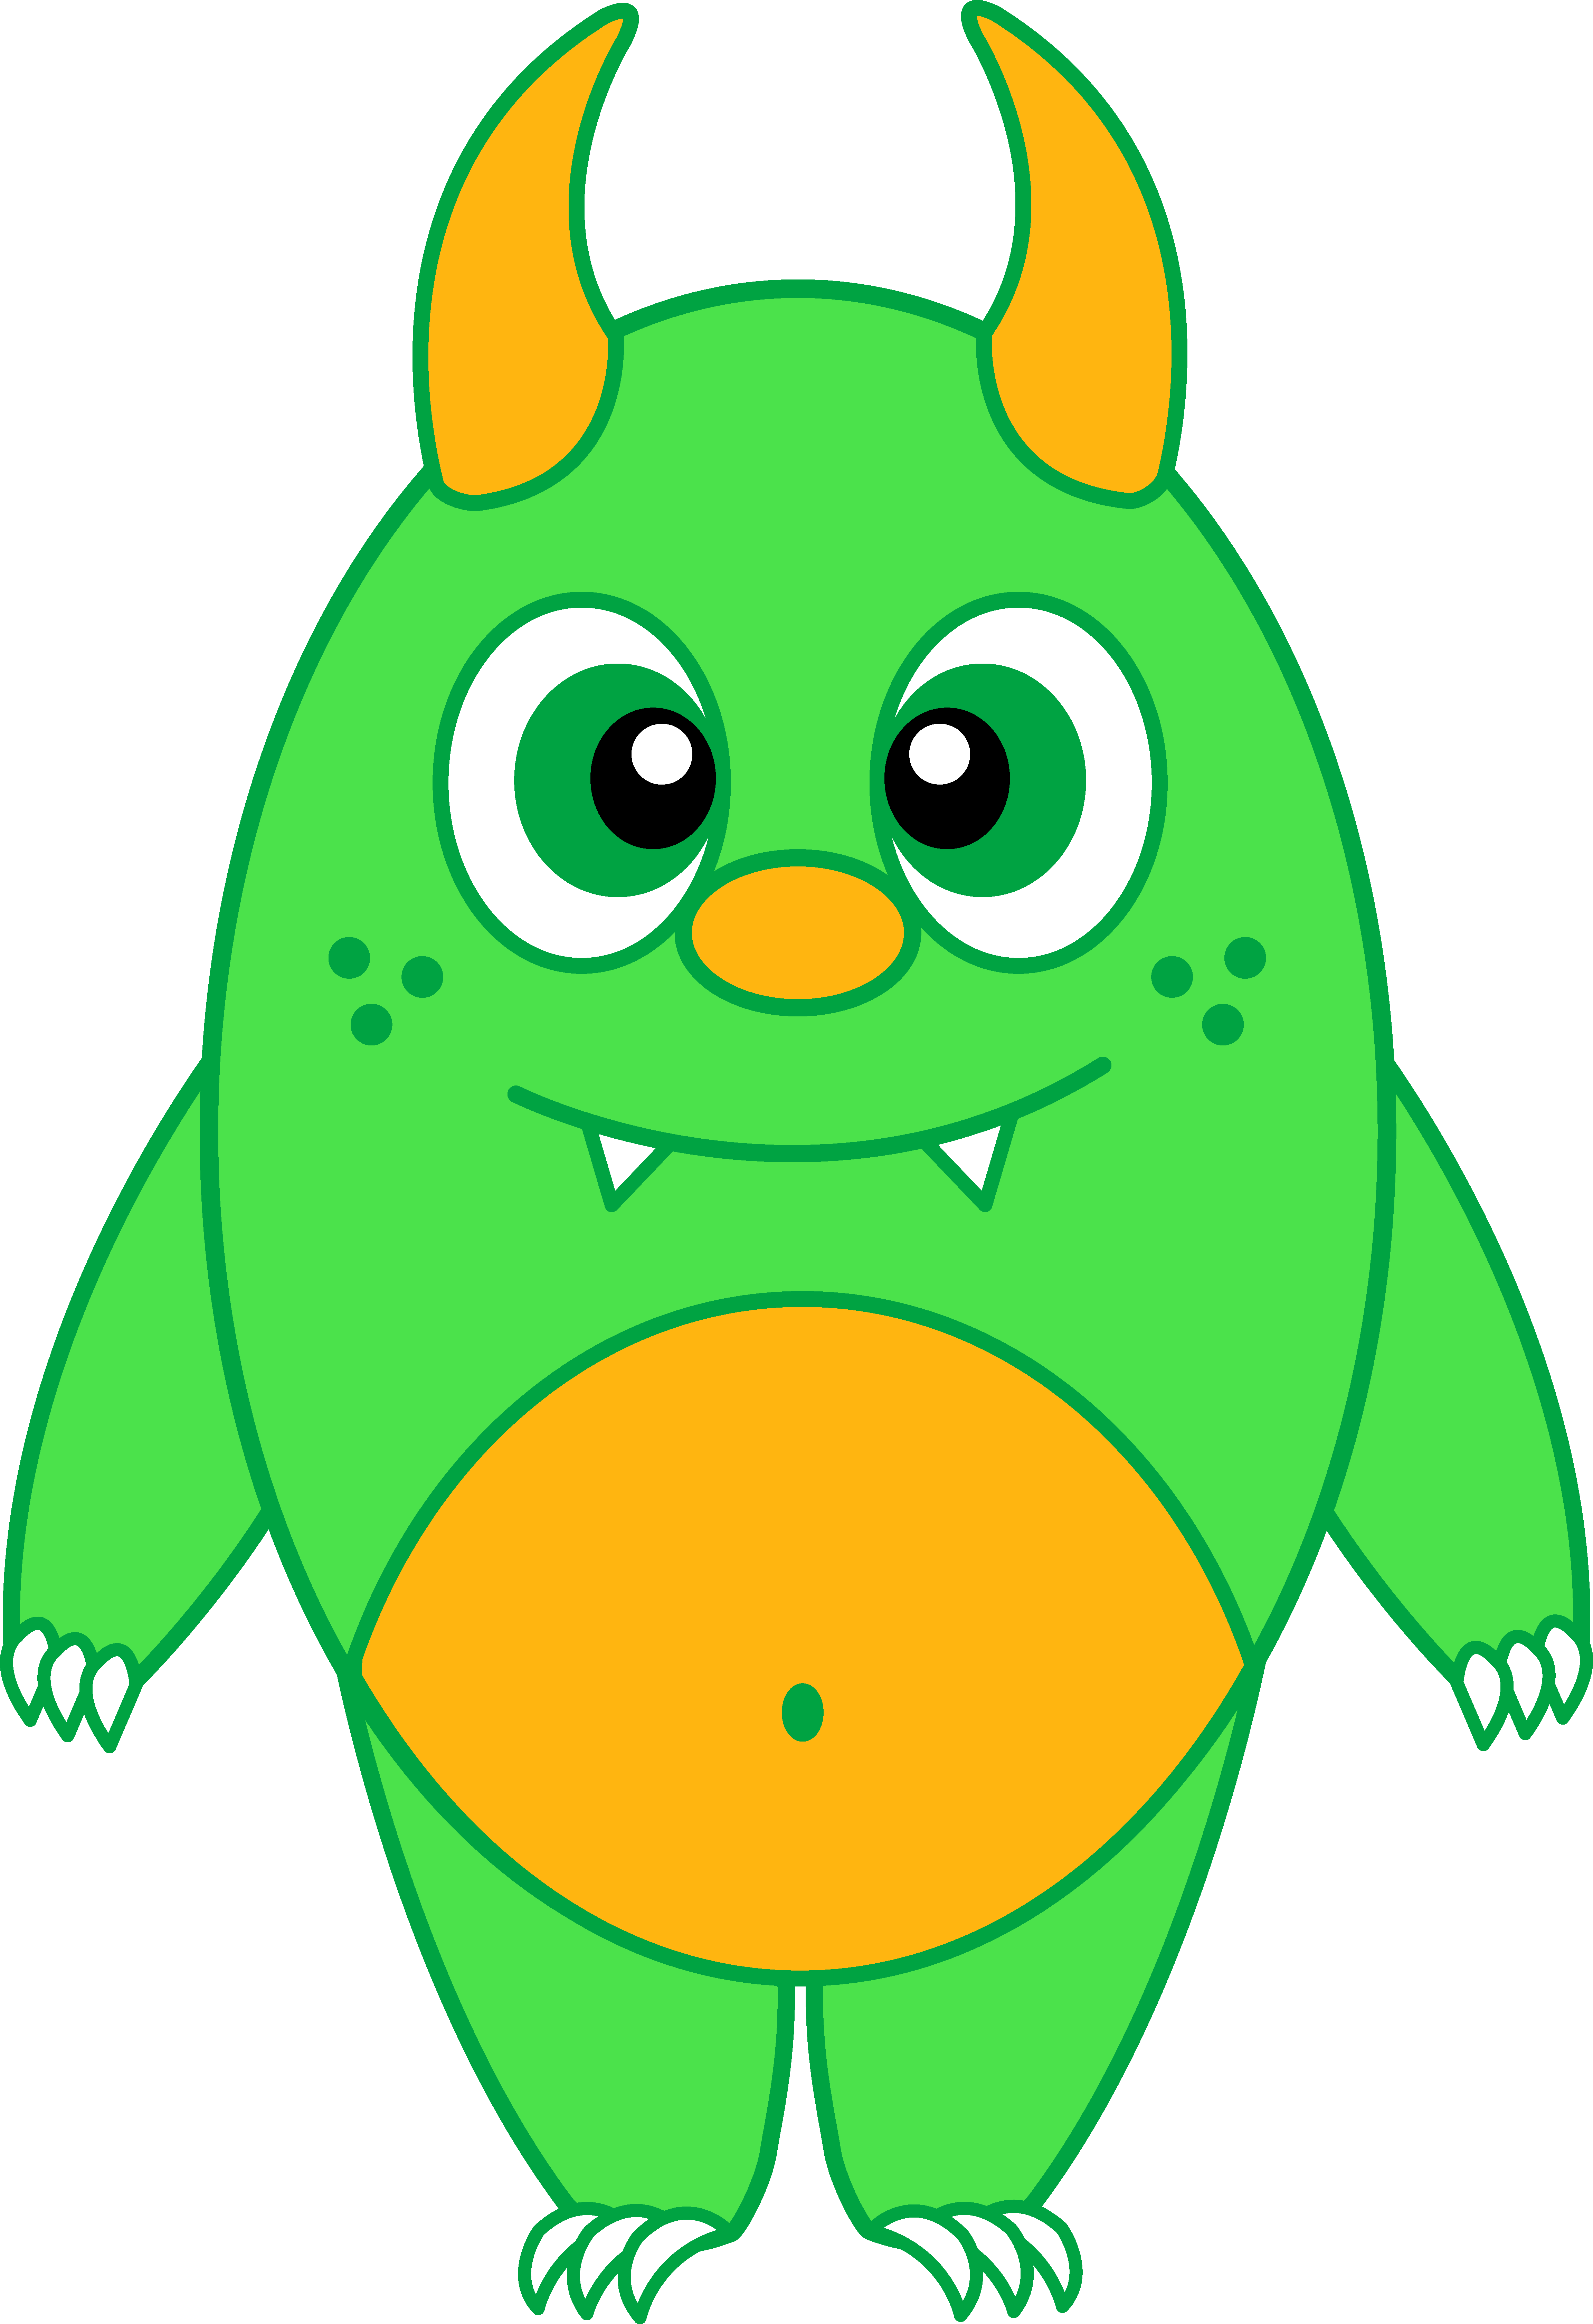 Silly monster clipart